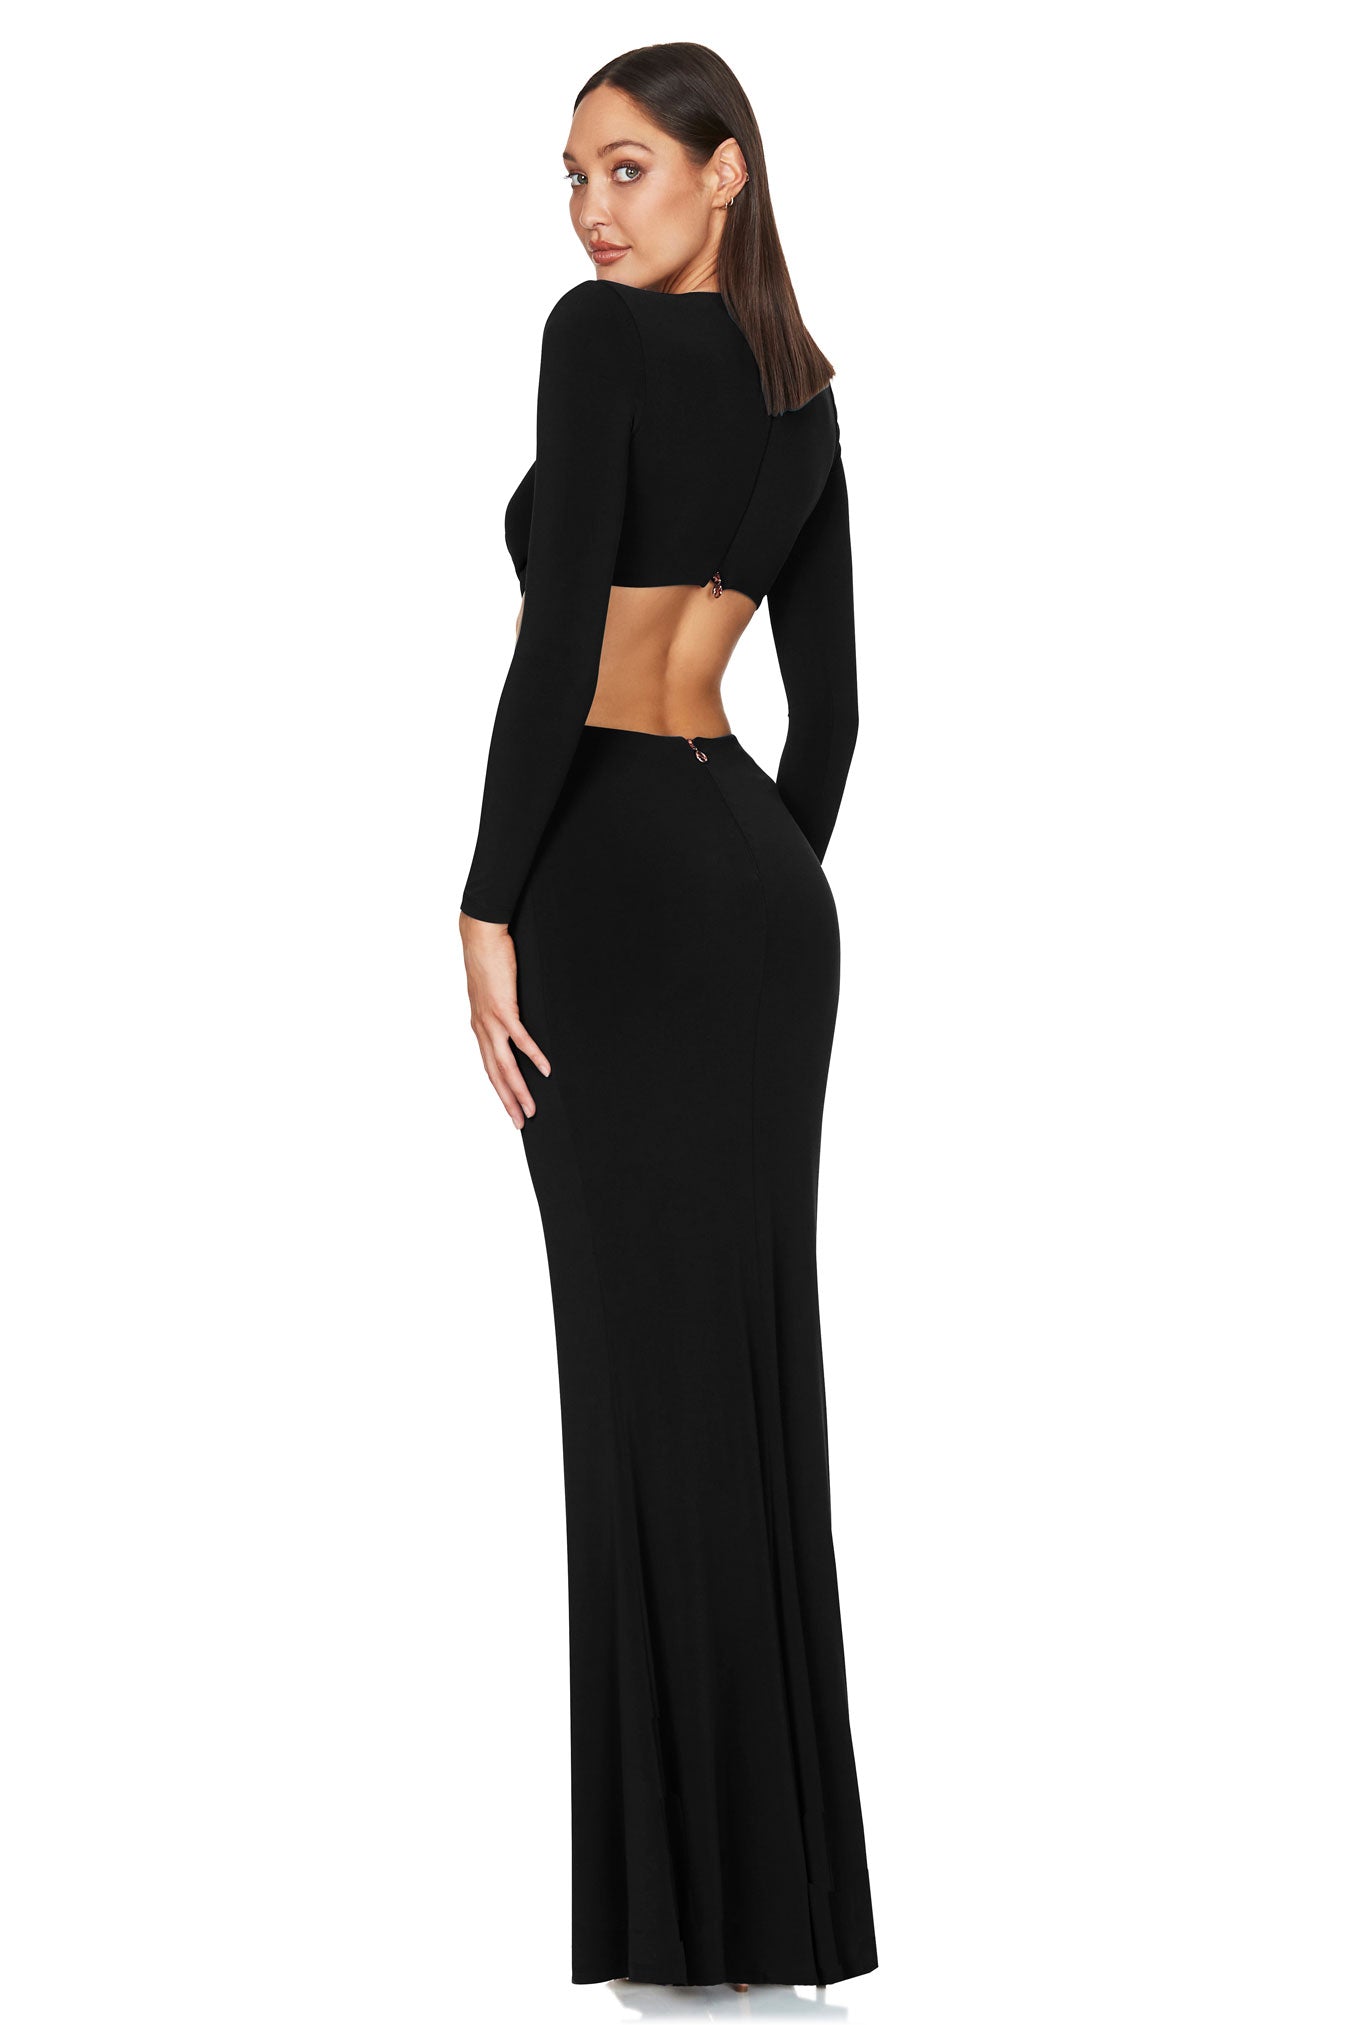 Riley Ring Cut Out Gown Black